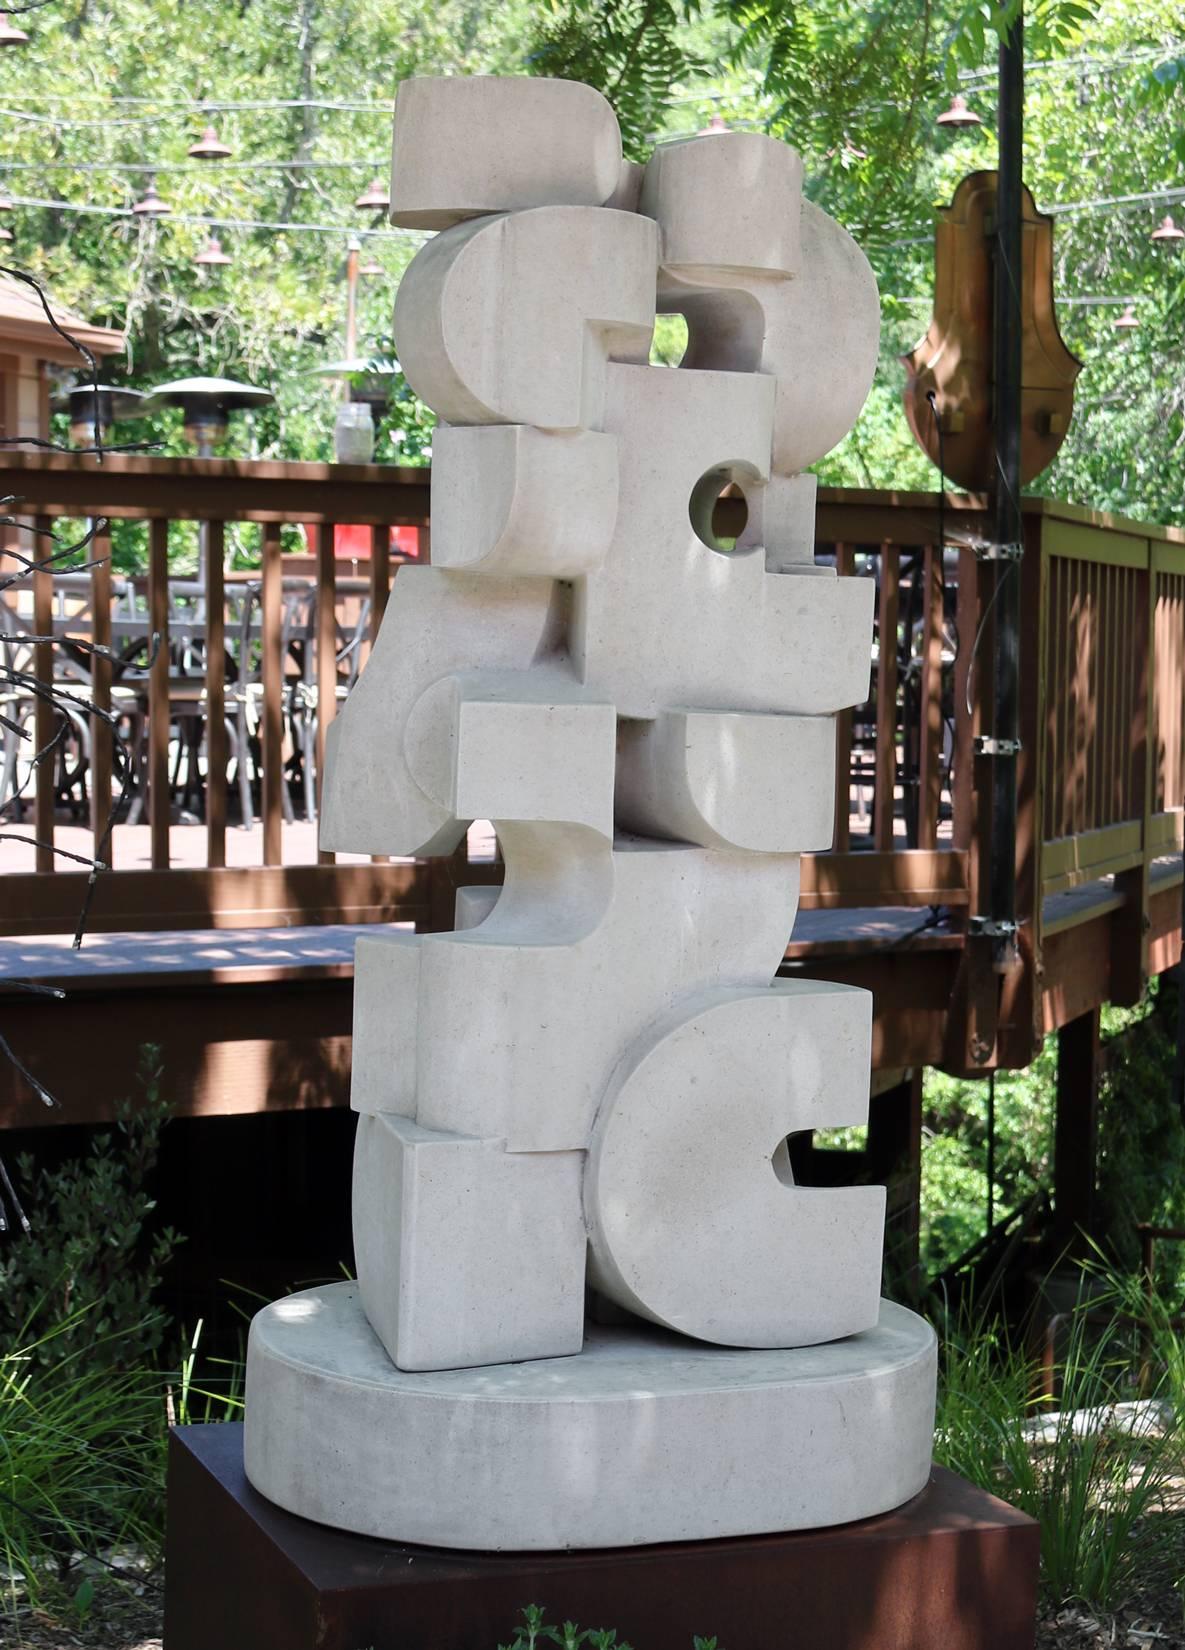 Echo Forge - Contemporary Sculpture by Jeff Metz